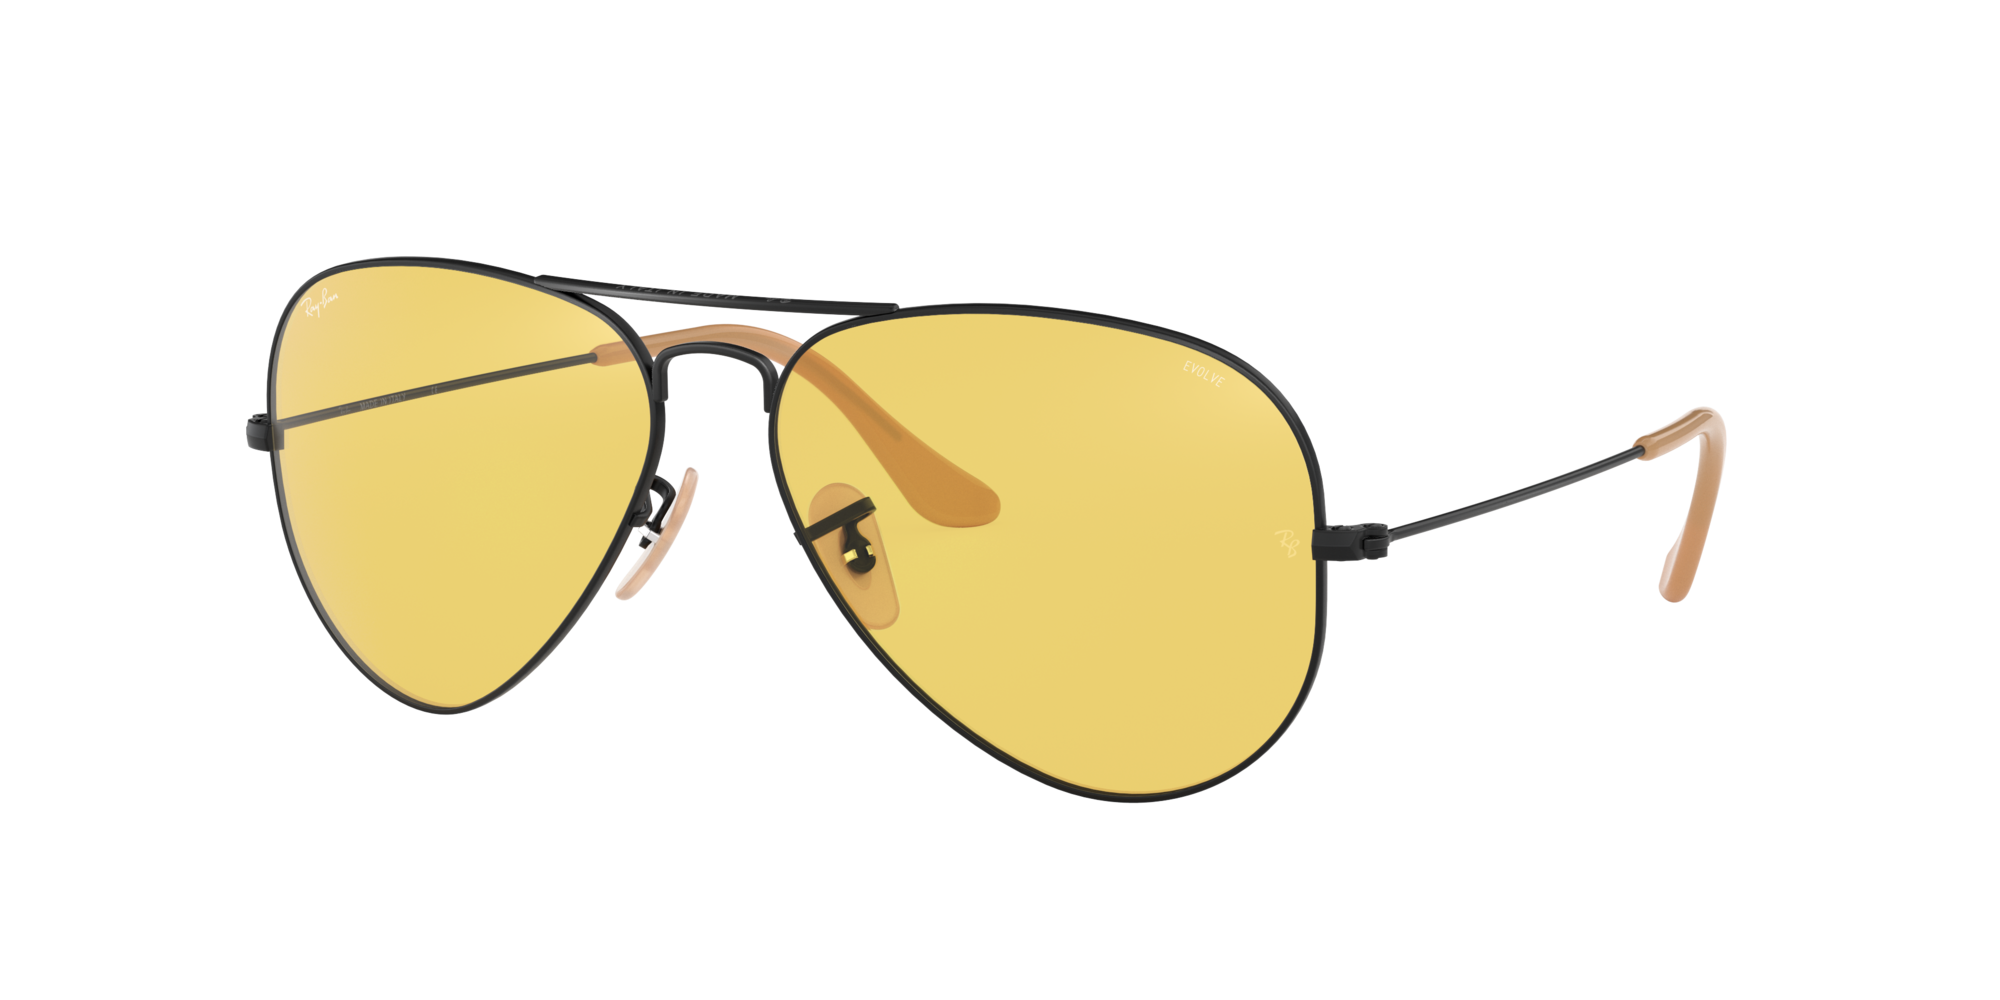 Ray-Ban RB3025 AVIATOR WASHED EVOLVE 58 